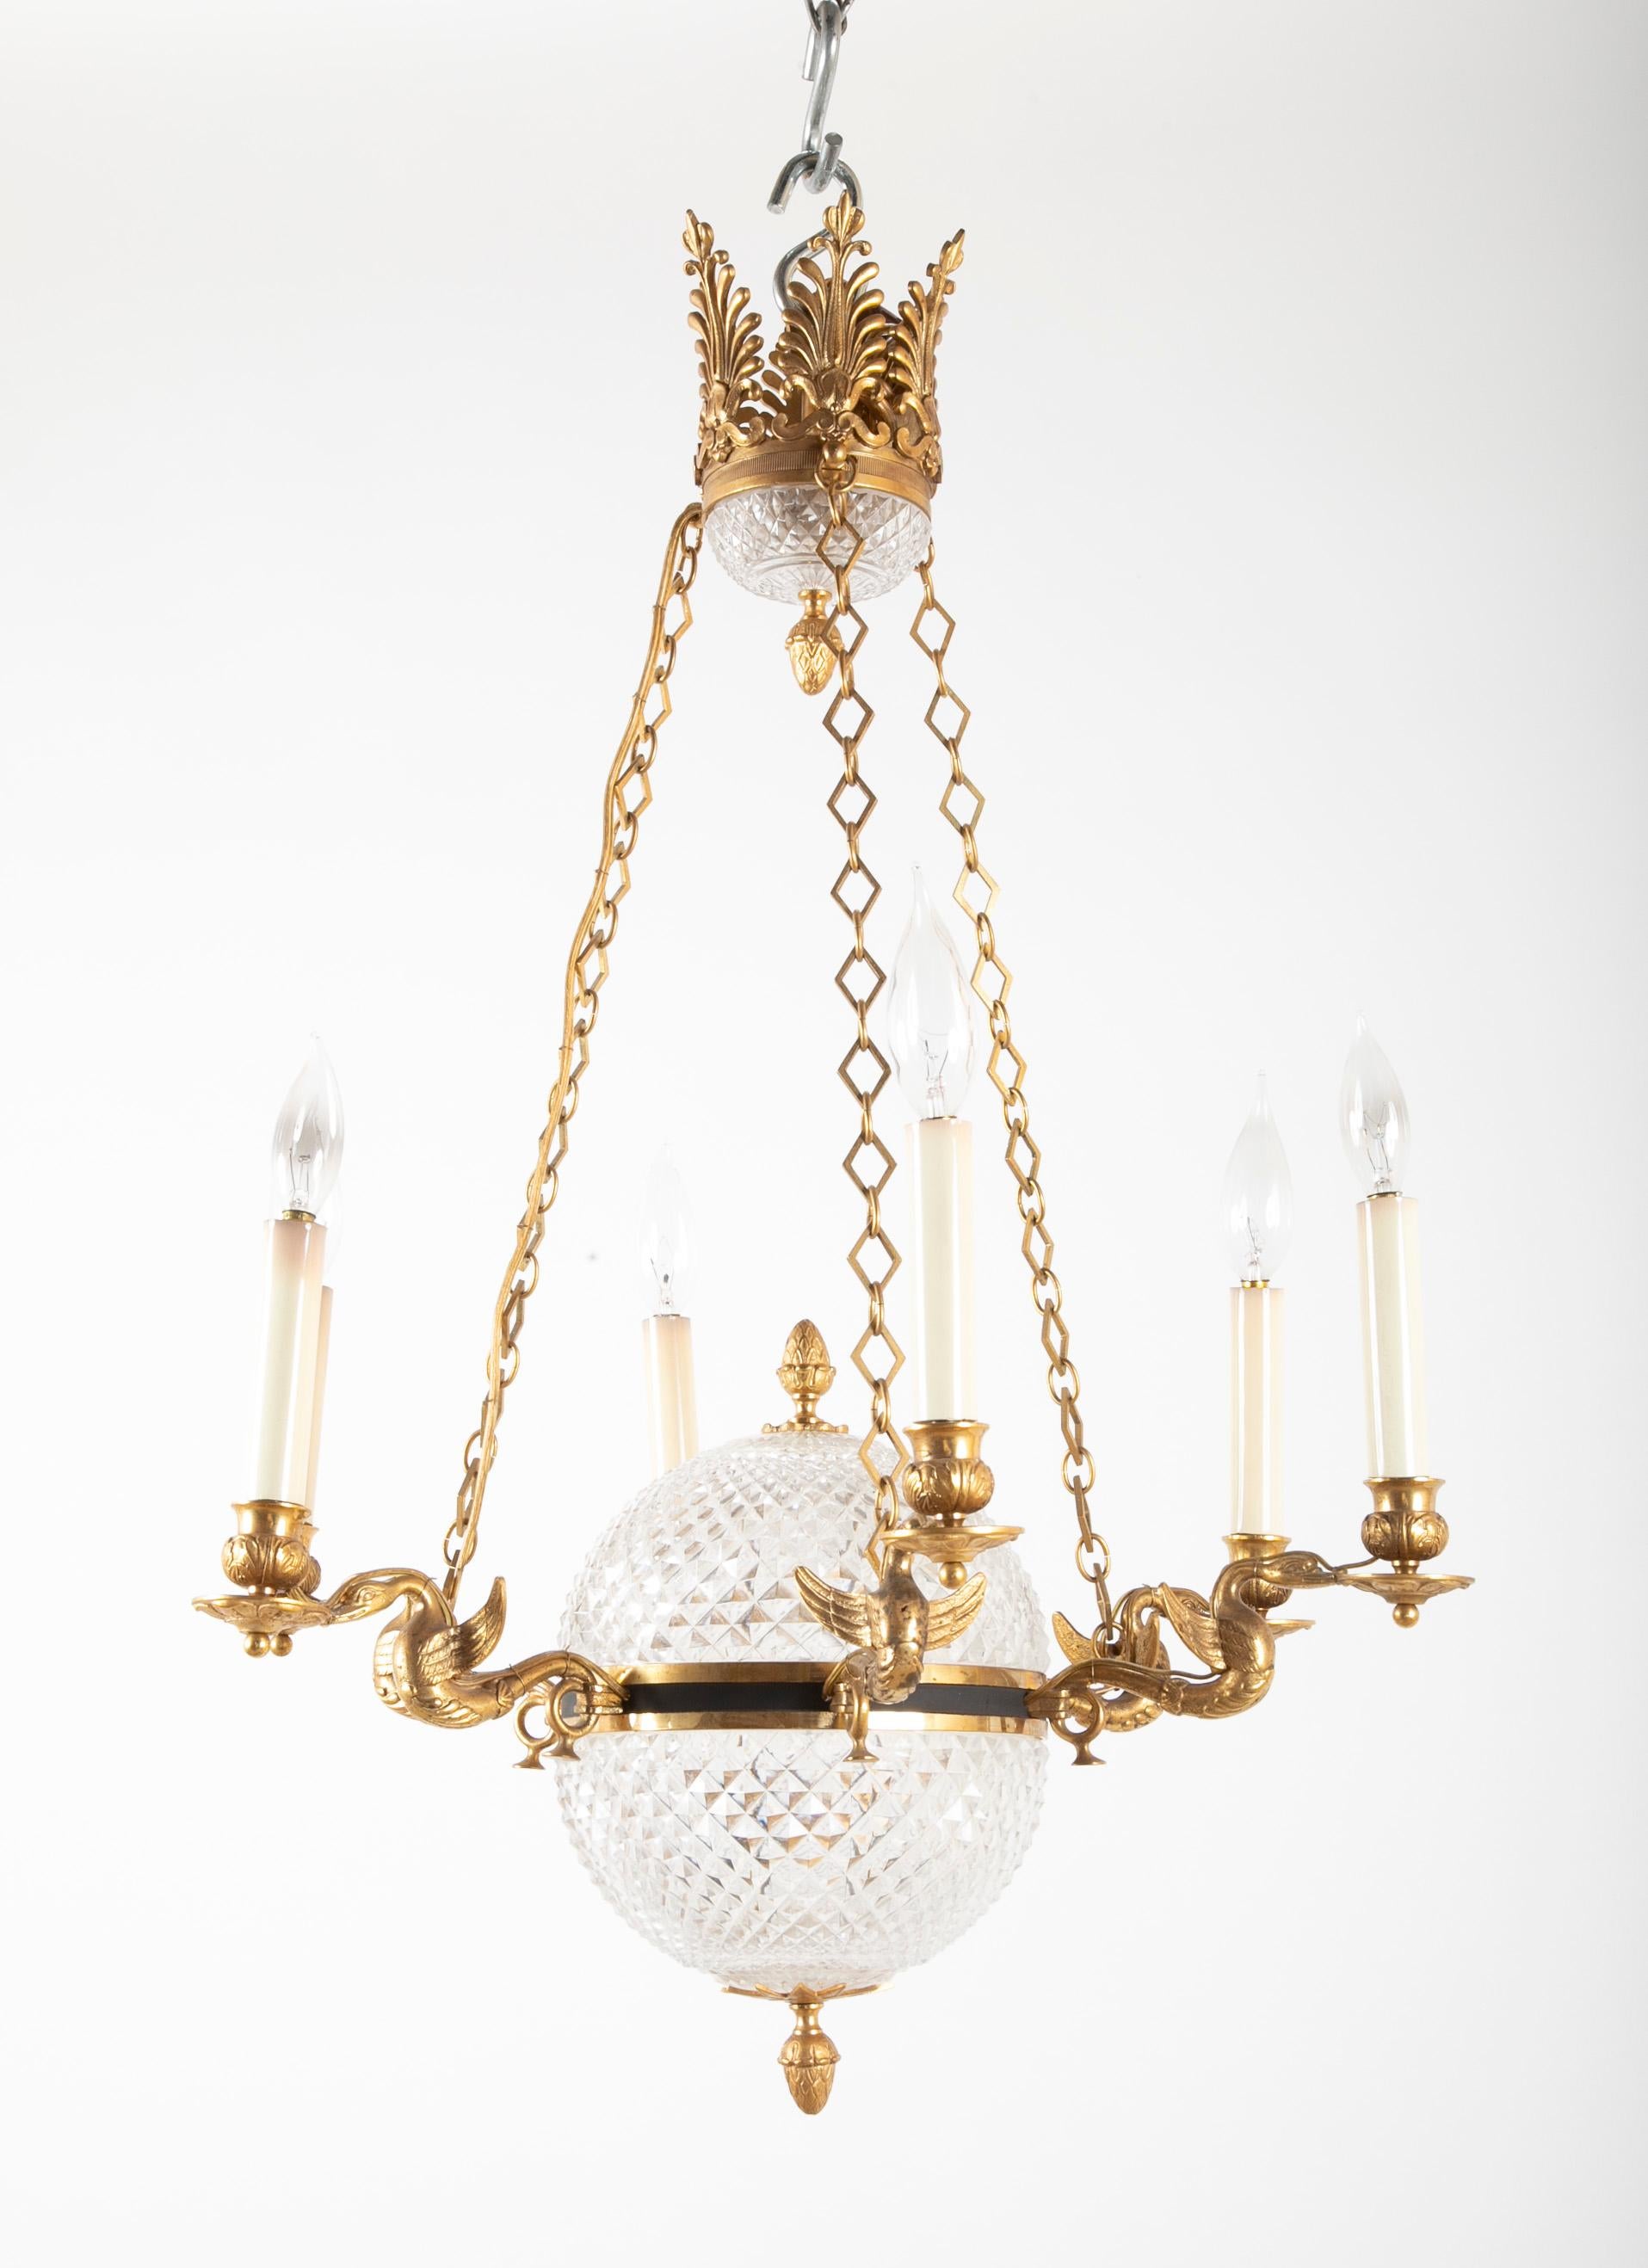 Cut Crystal Chandelier with Central Globe, Swan Arms and Elaborate Crown 9